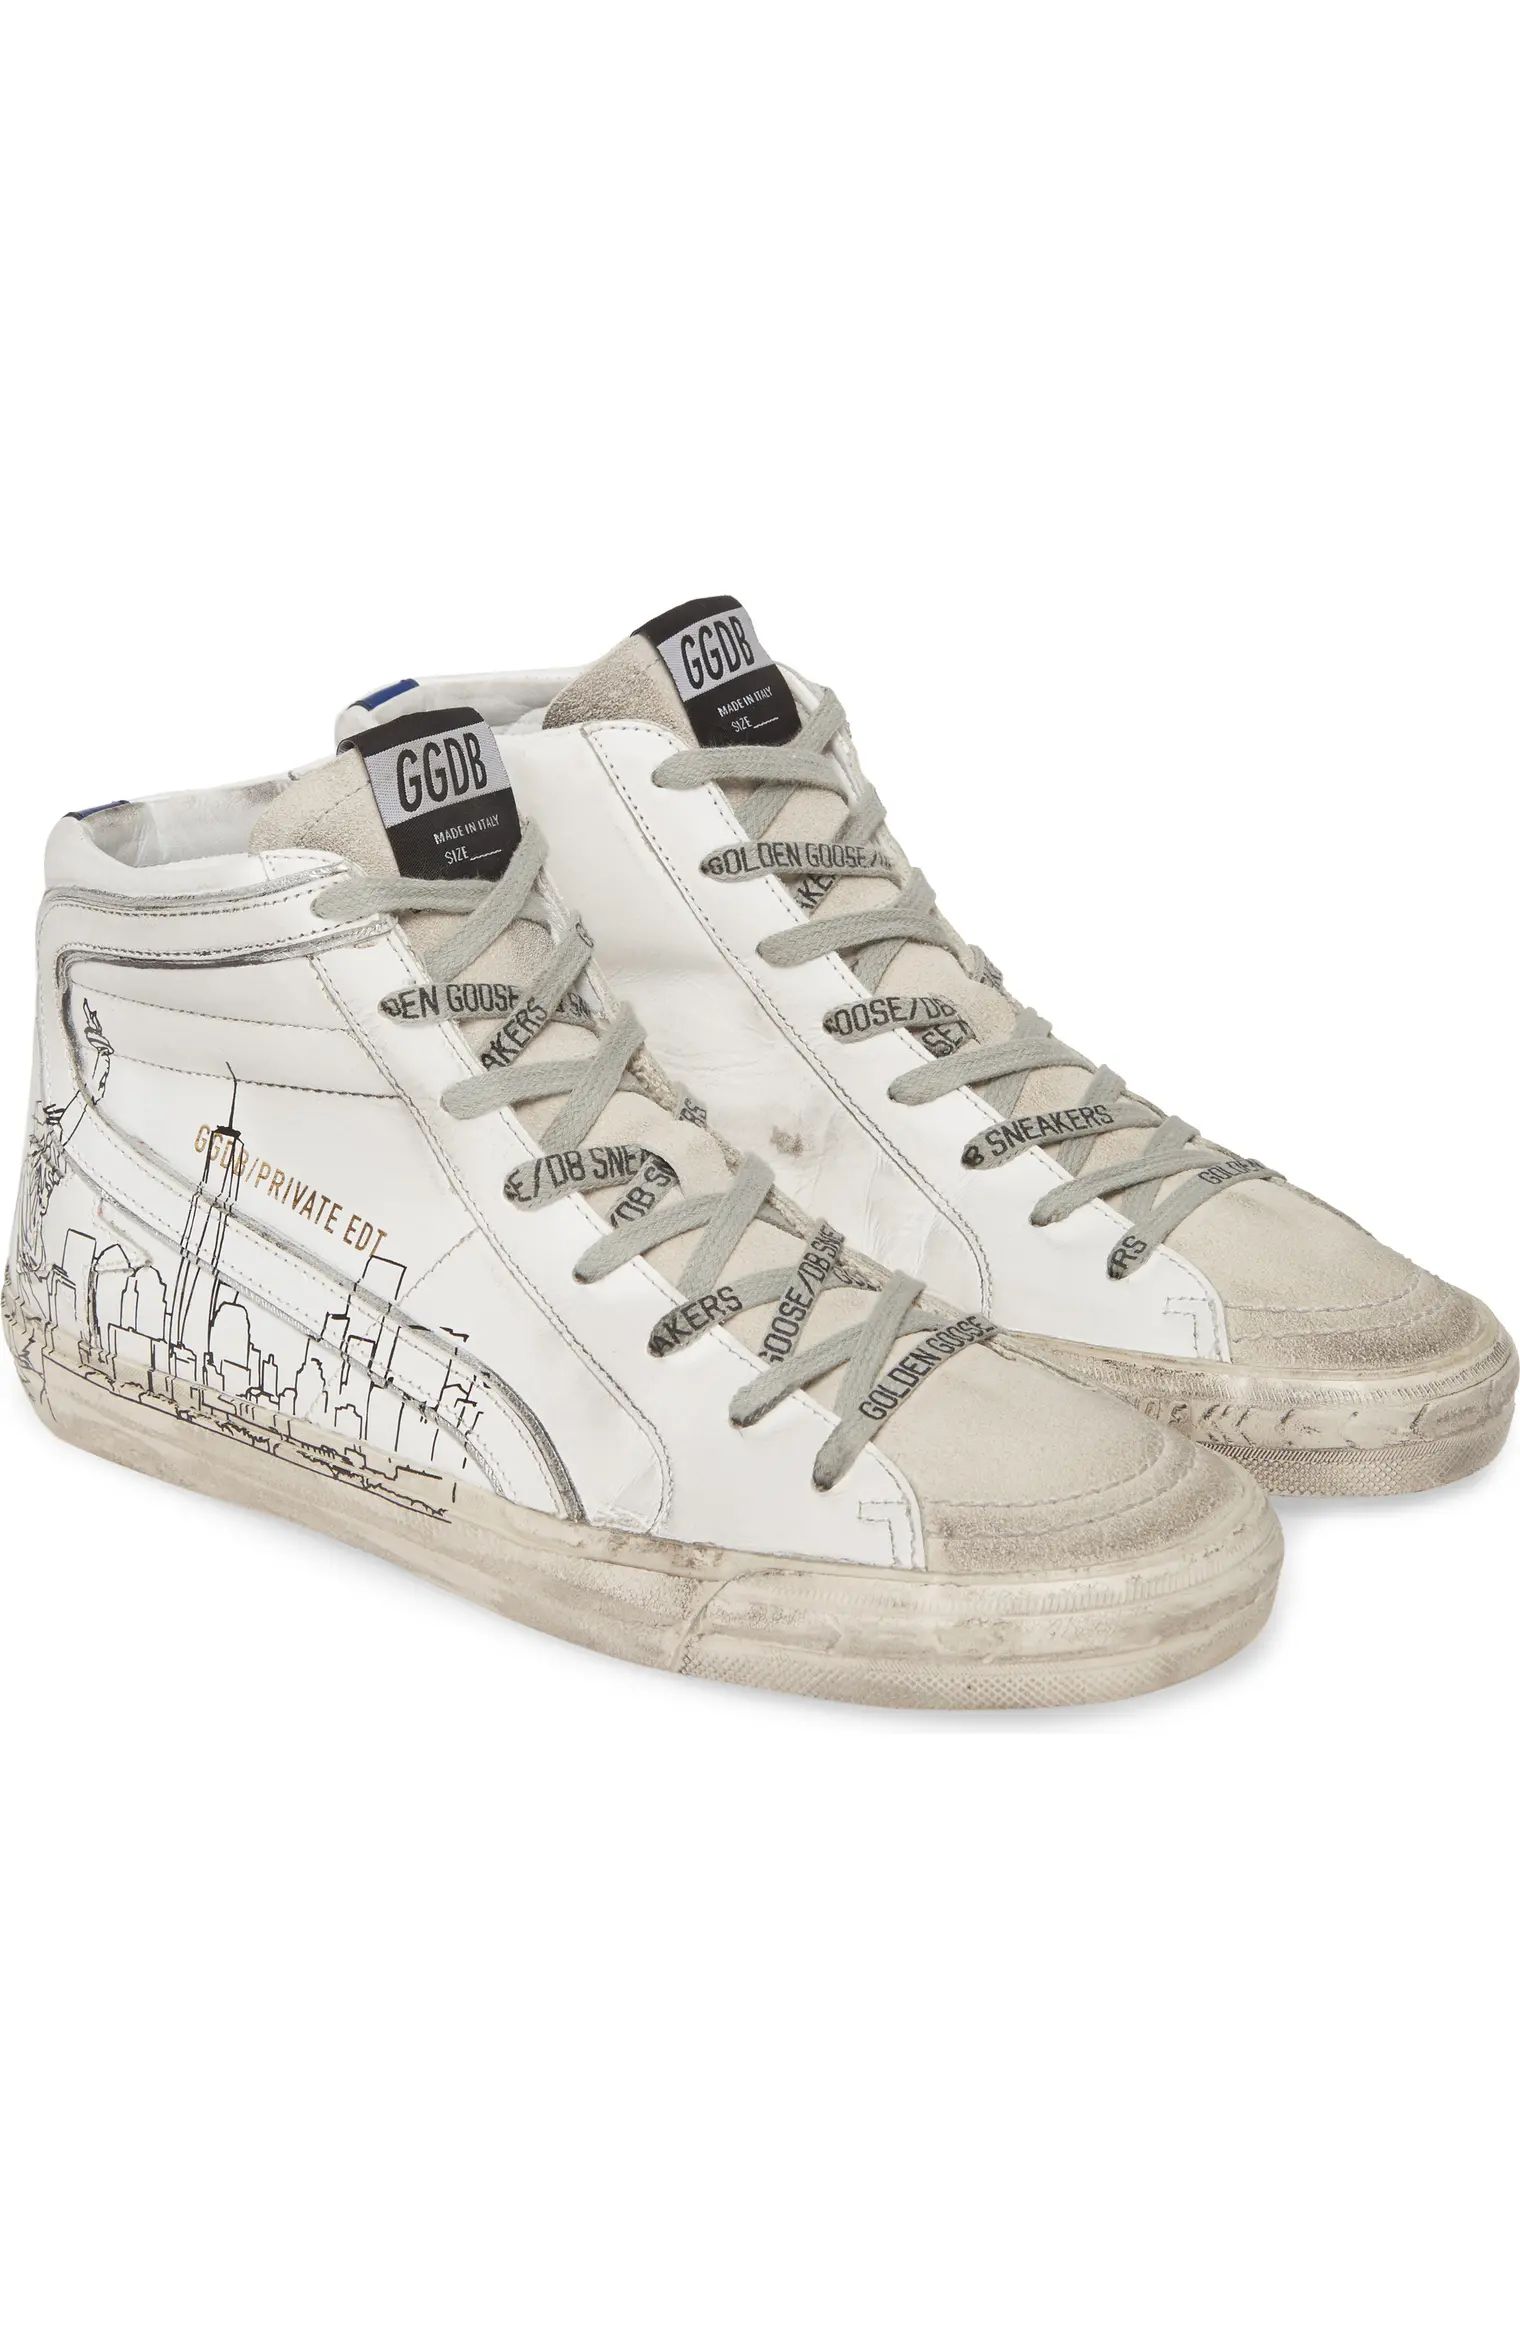 Slide NYC Graphic High Top Sneaker | Nordstrom